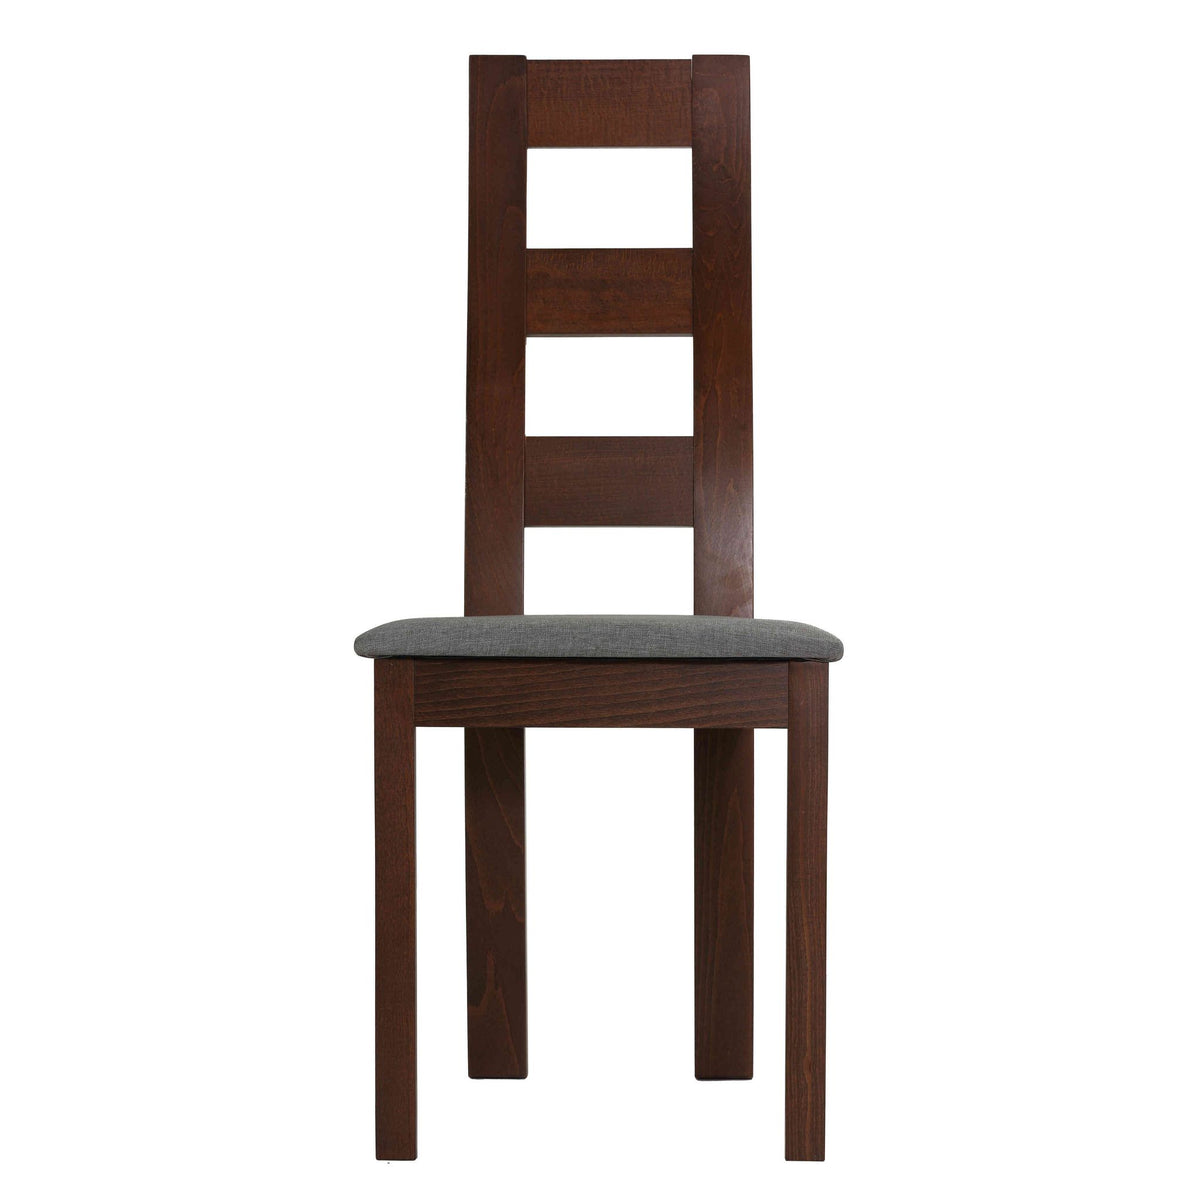 Cortesi Home Cuadro Dining Chair in Charcoal Fabric, Walnut Finish (Set of 2)